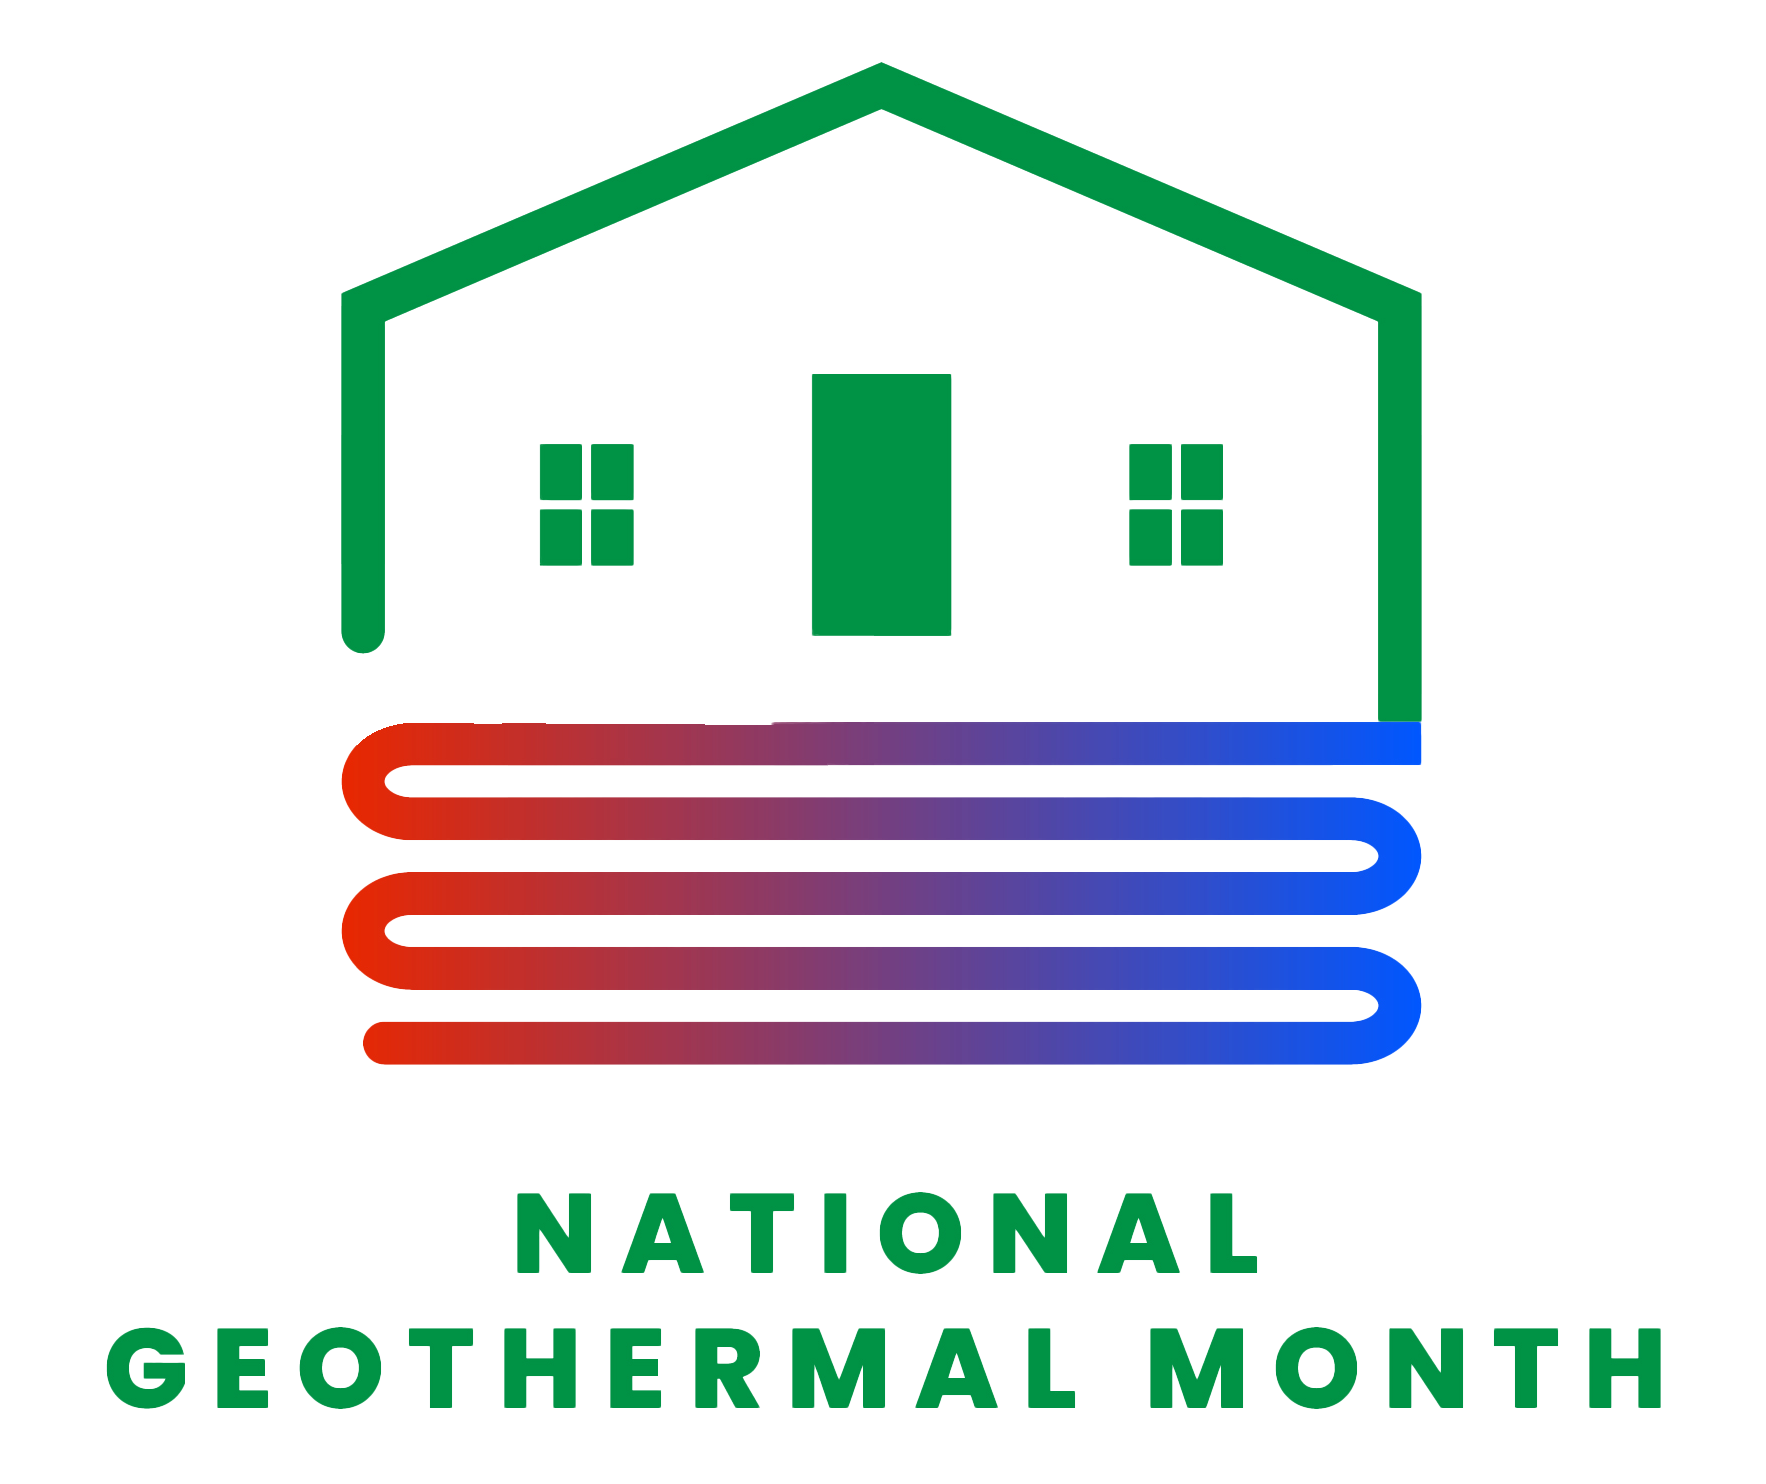 April is National Geothermal Month!